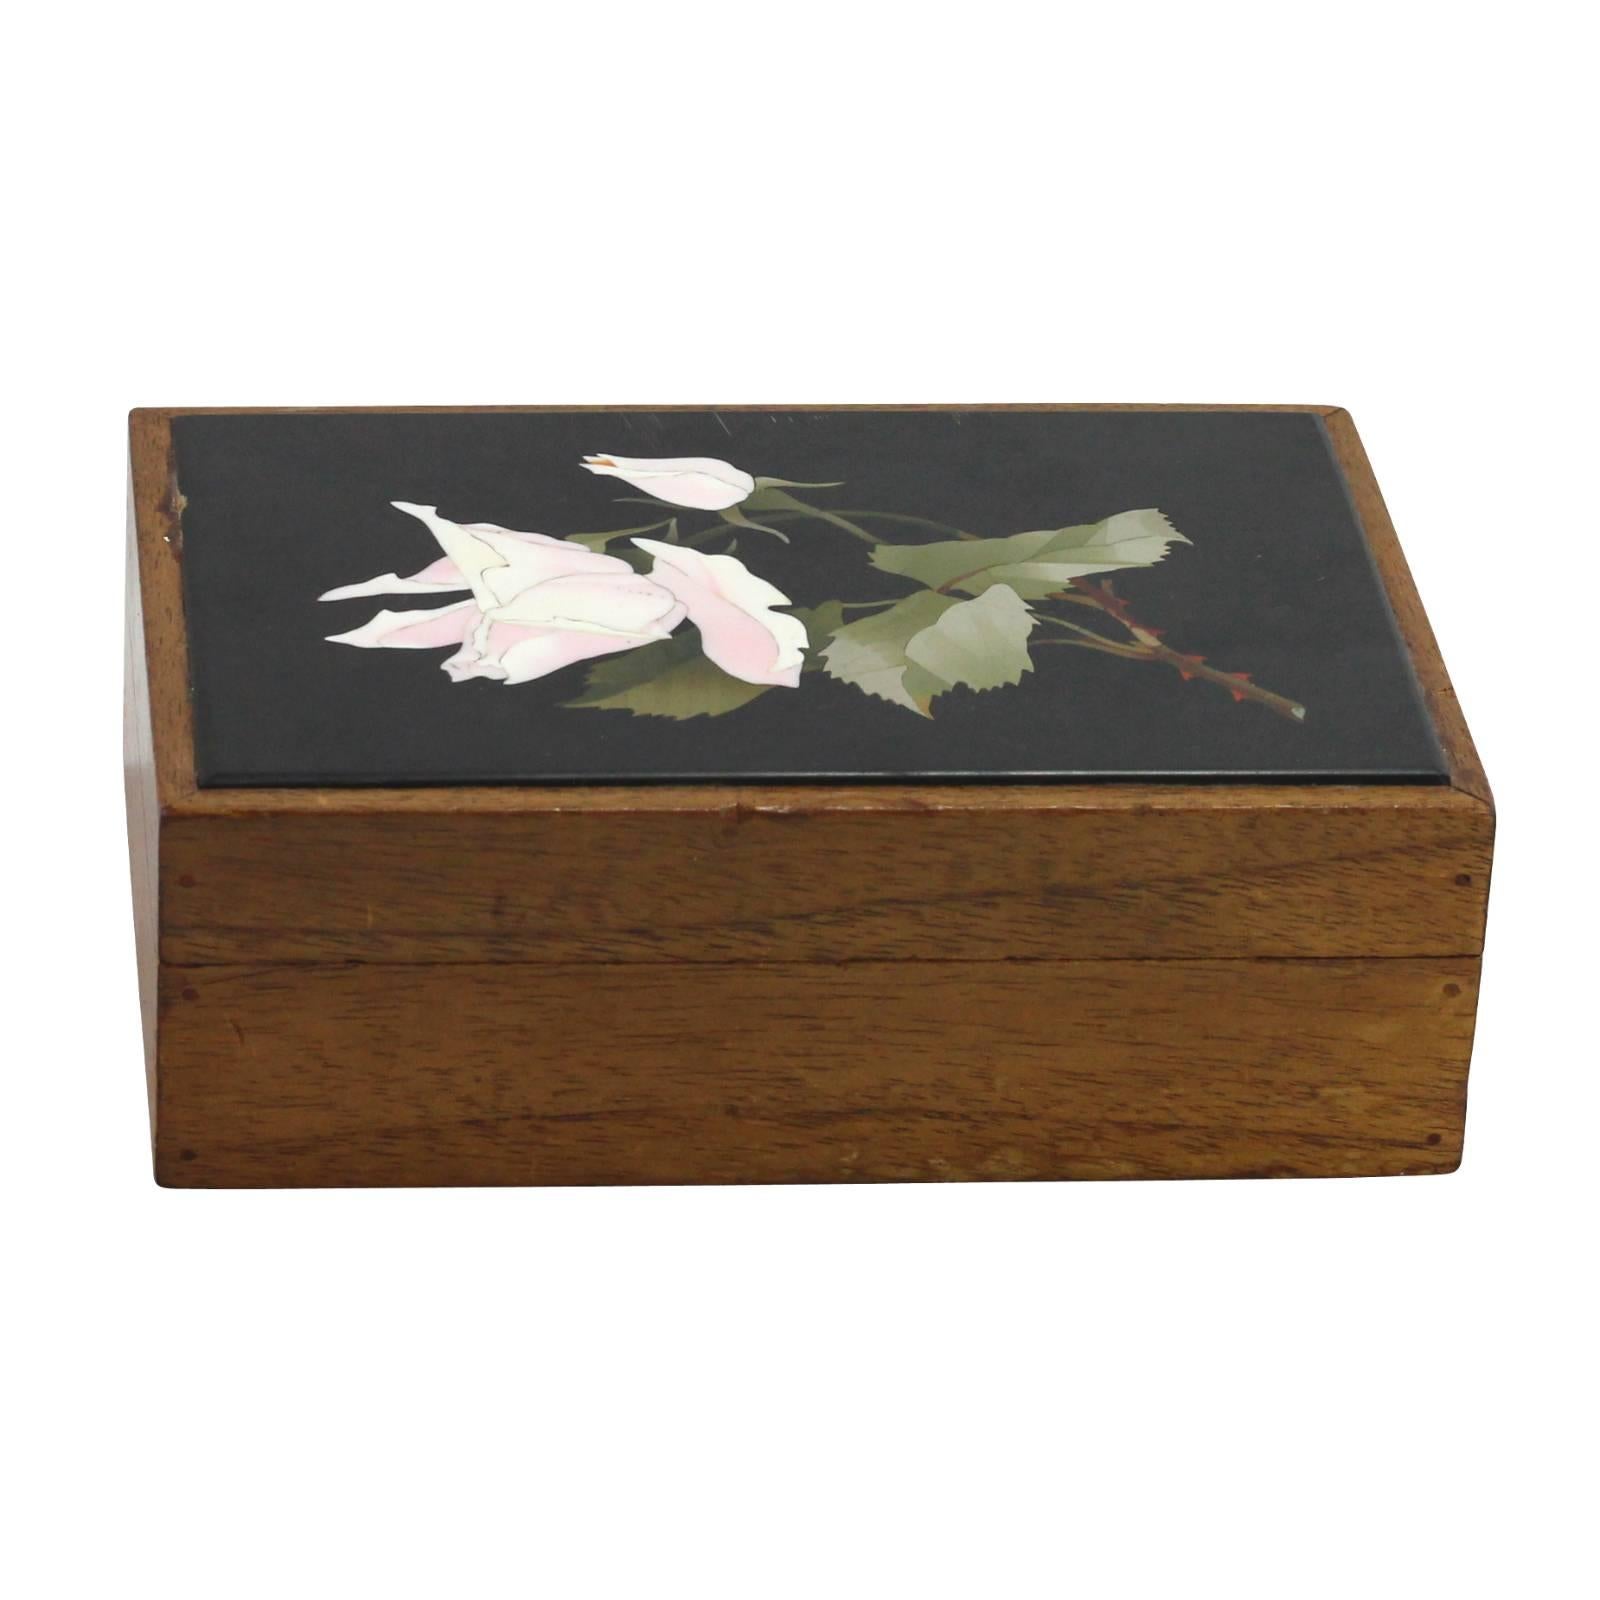 An Italian, wooden jewelry box from the 1920s decorated with a flower made using the Pietra Dura technique.

Pietra Dura is the Italian method of using cut and fitted, highly polished colored stones to create an image, inlaid in another